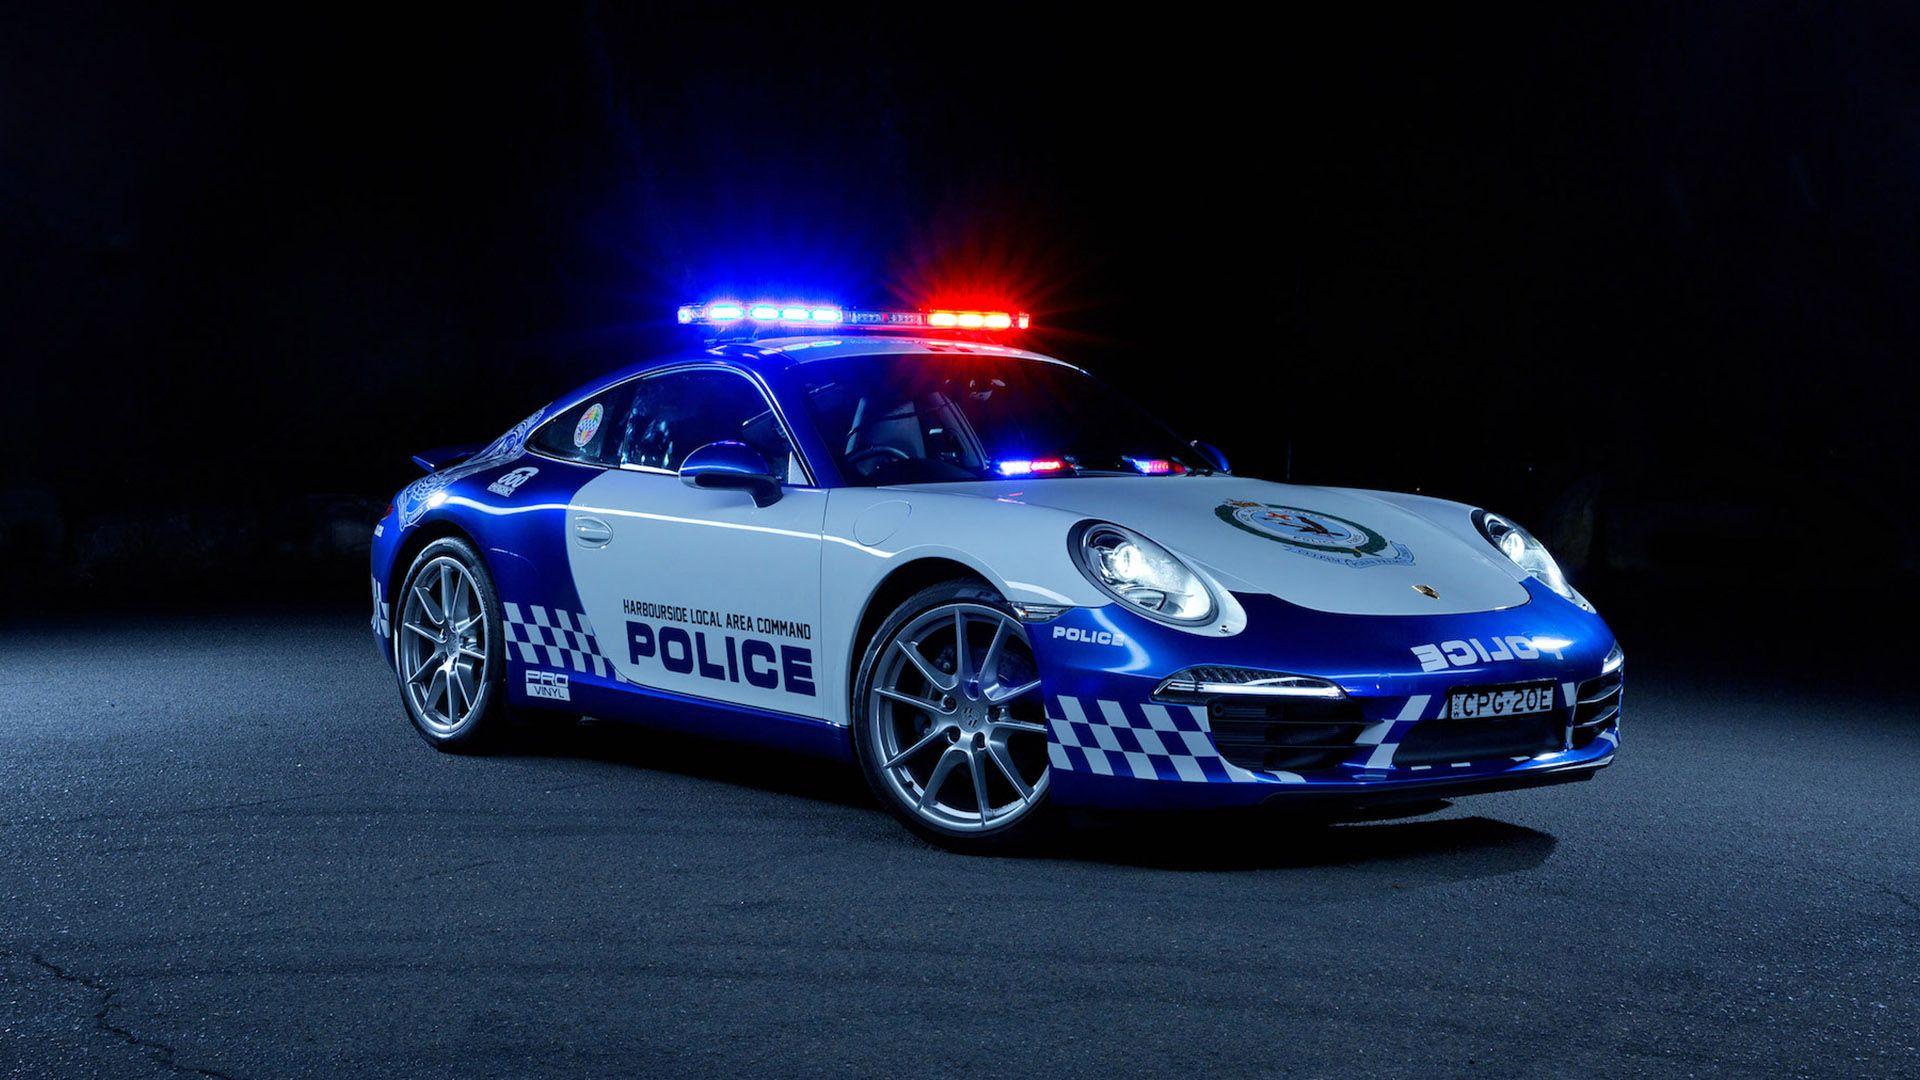 Stylish Cars Wallpaper Awesome Free Police Car Wallpaper